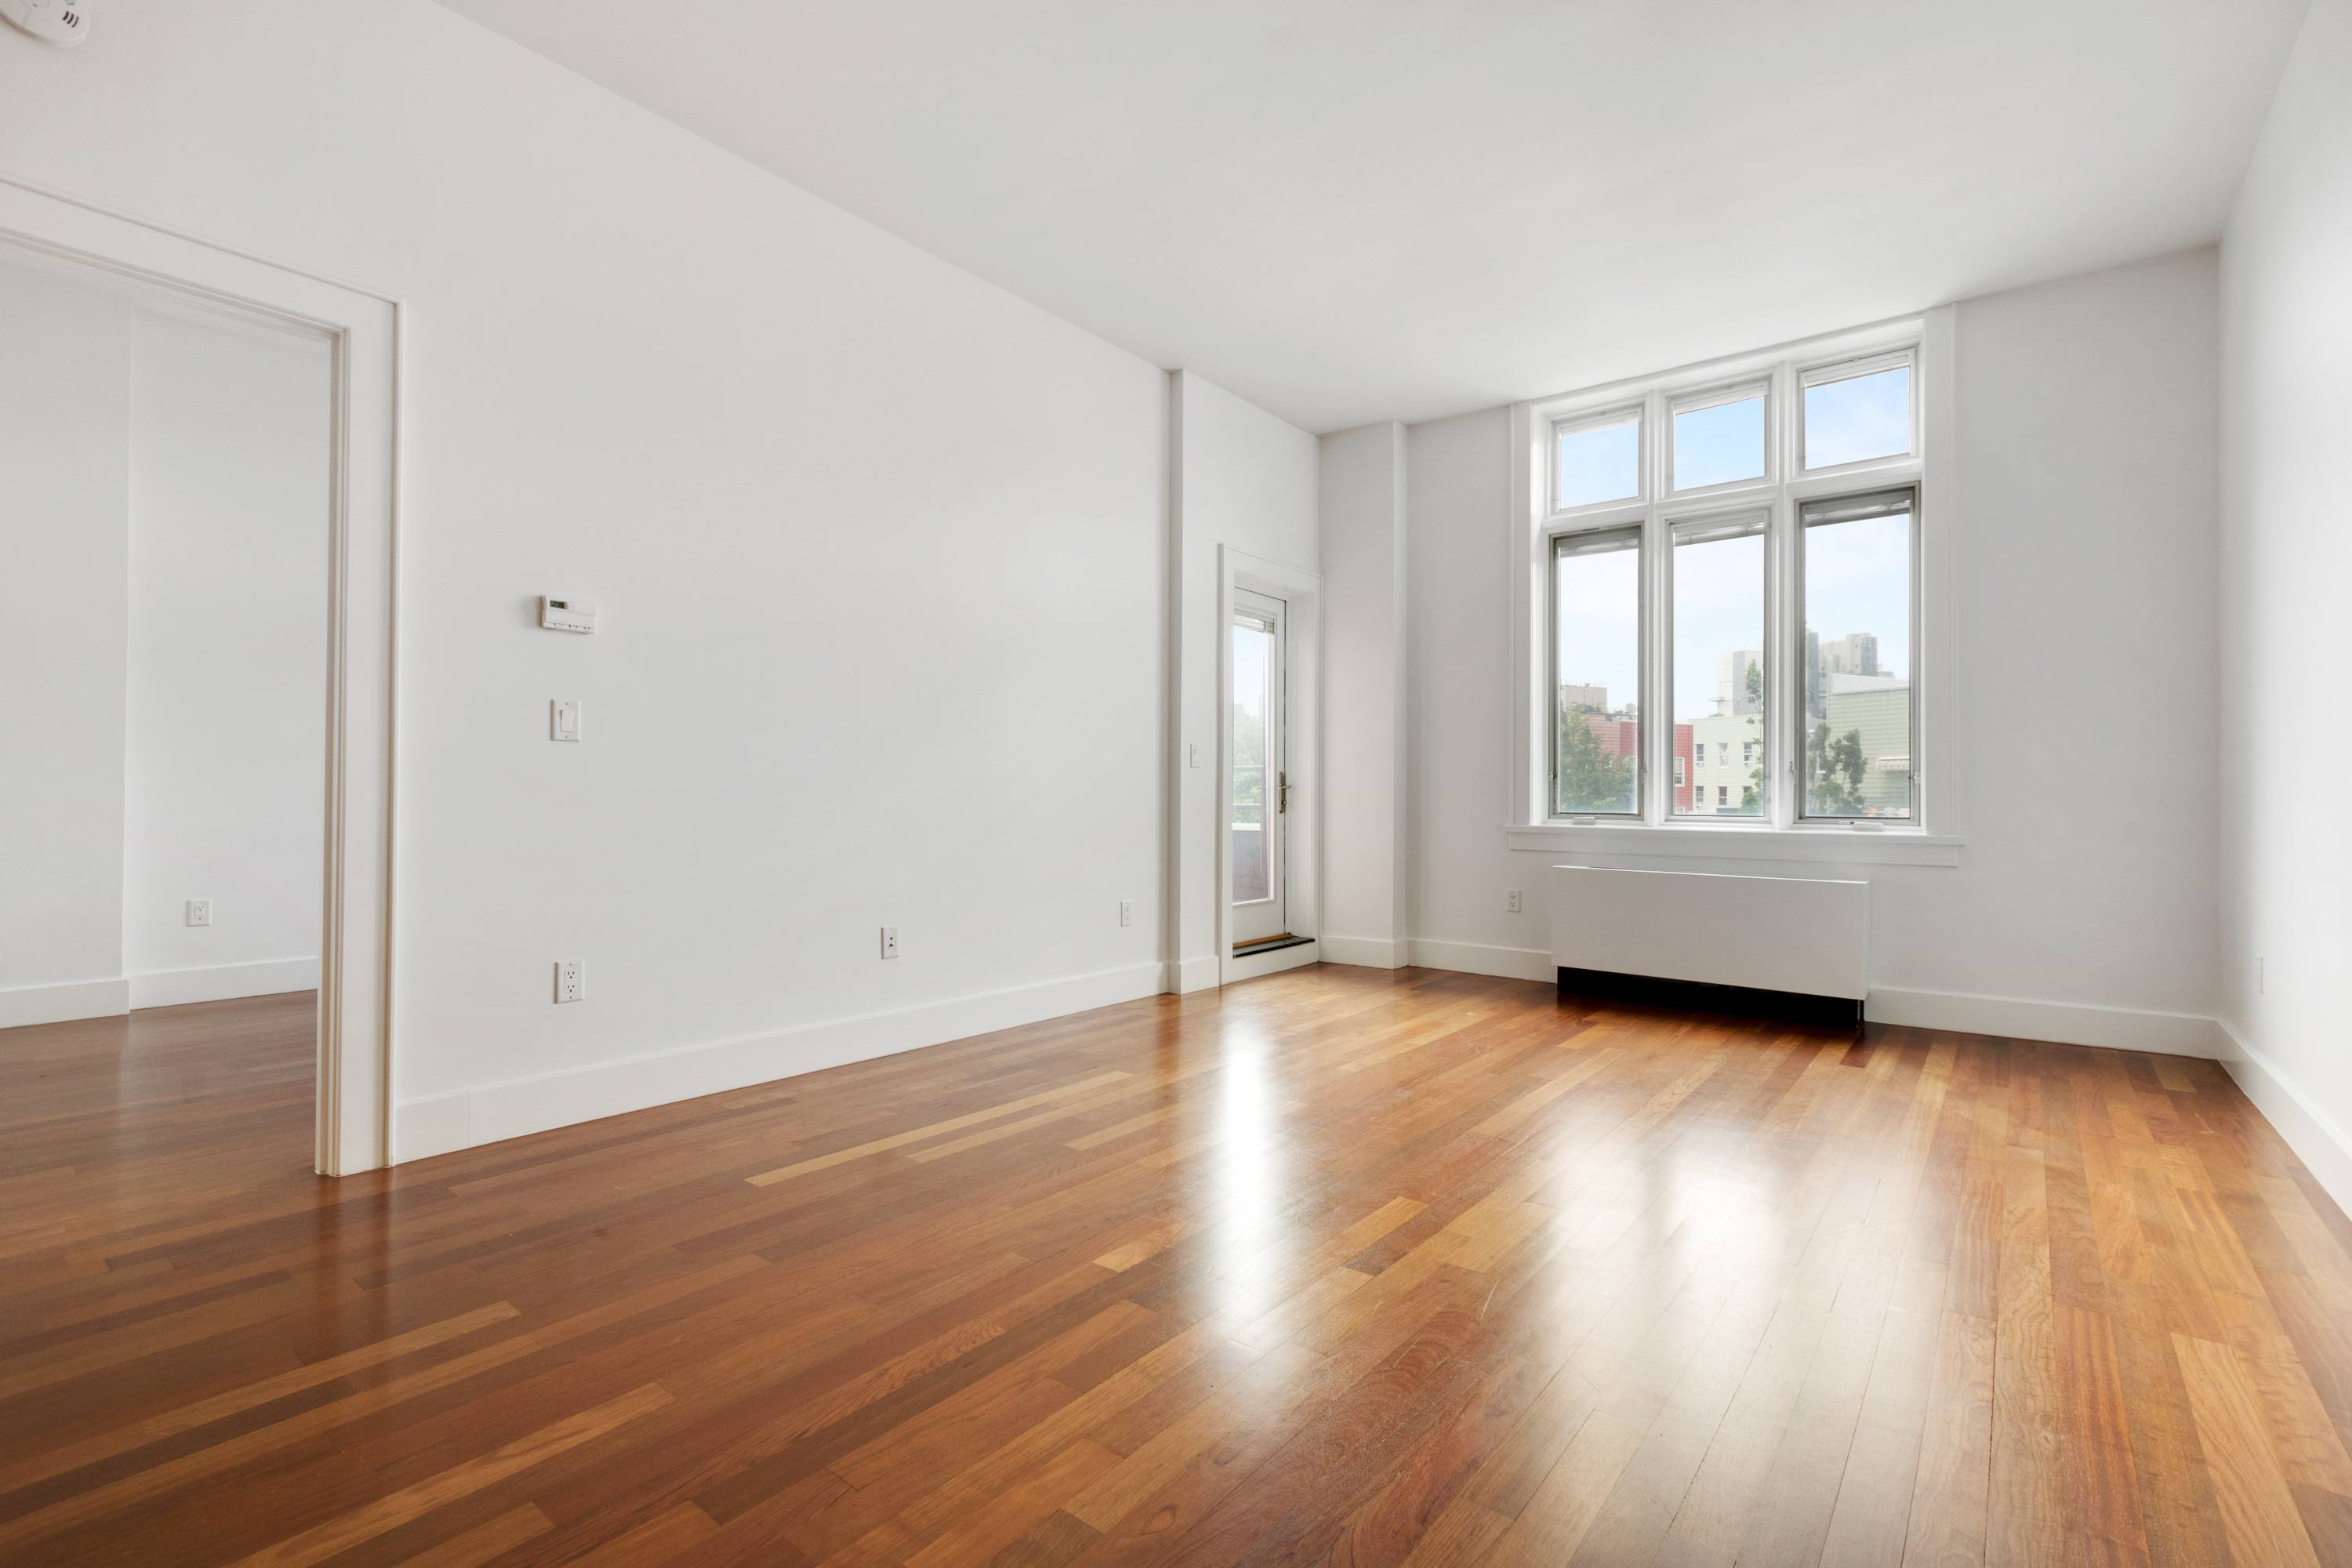 1 bed 1 Bath Balcony The Oakland Indoor Parking Space Available additional fee applies This condominium residence located in Greenpoint has become synonymous with luxury living in the area.